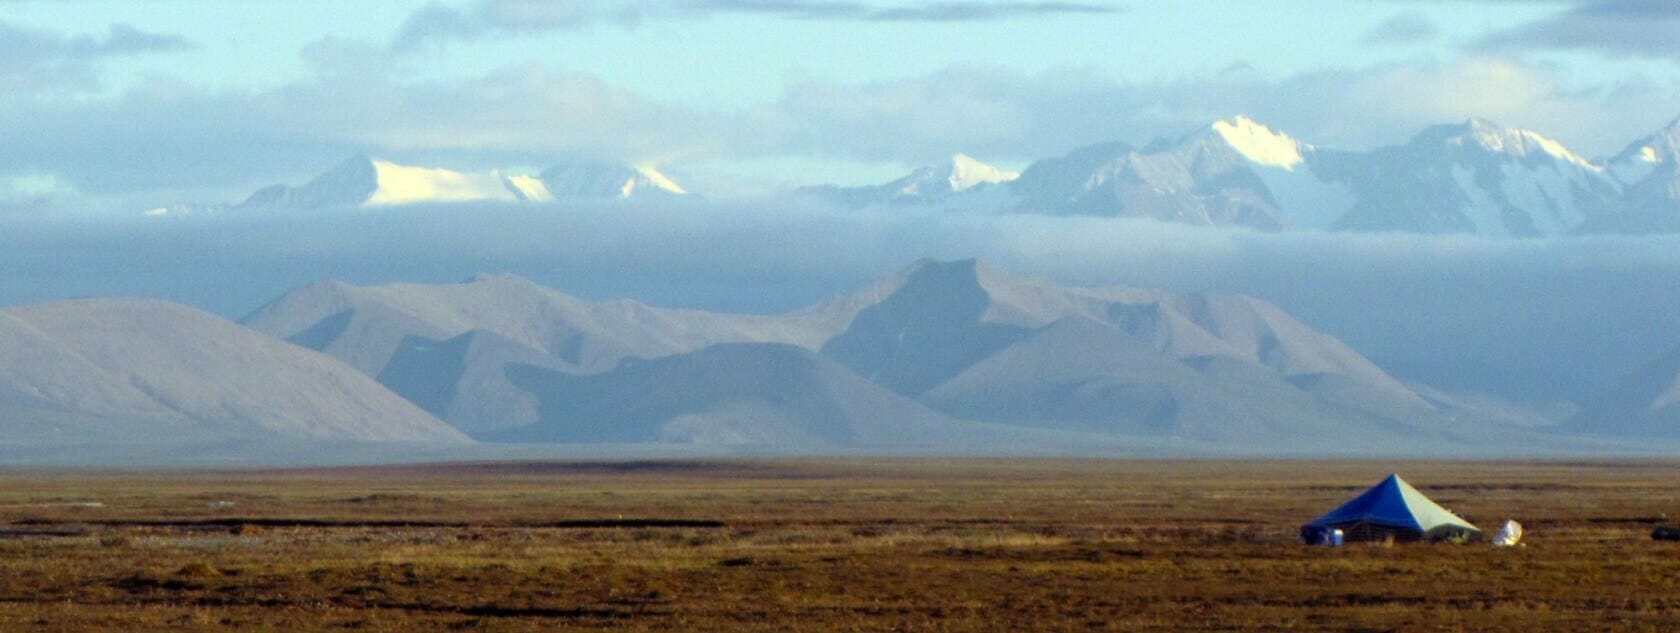 Camping in ANWR